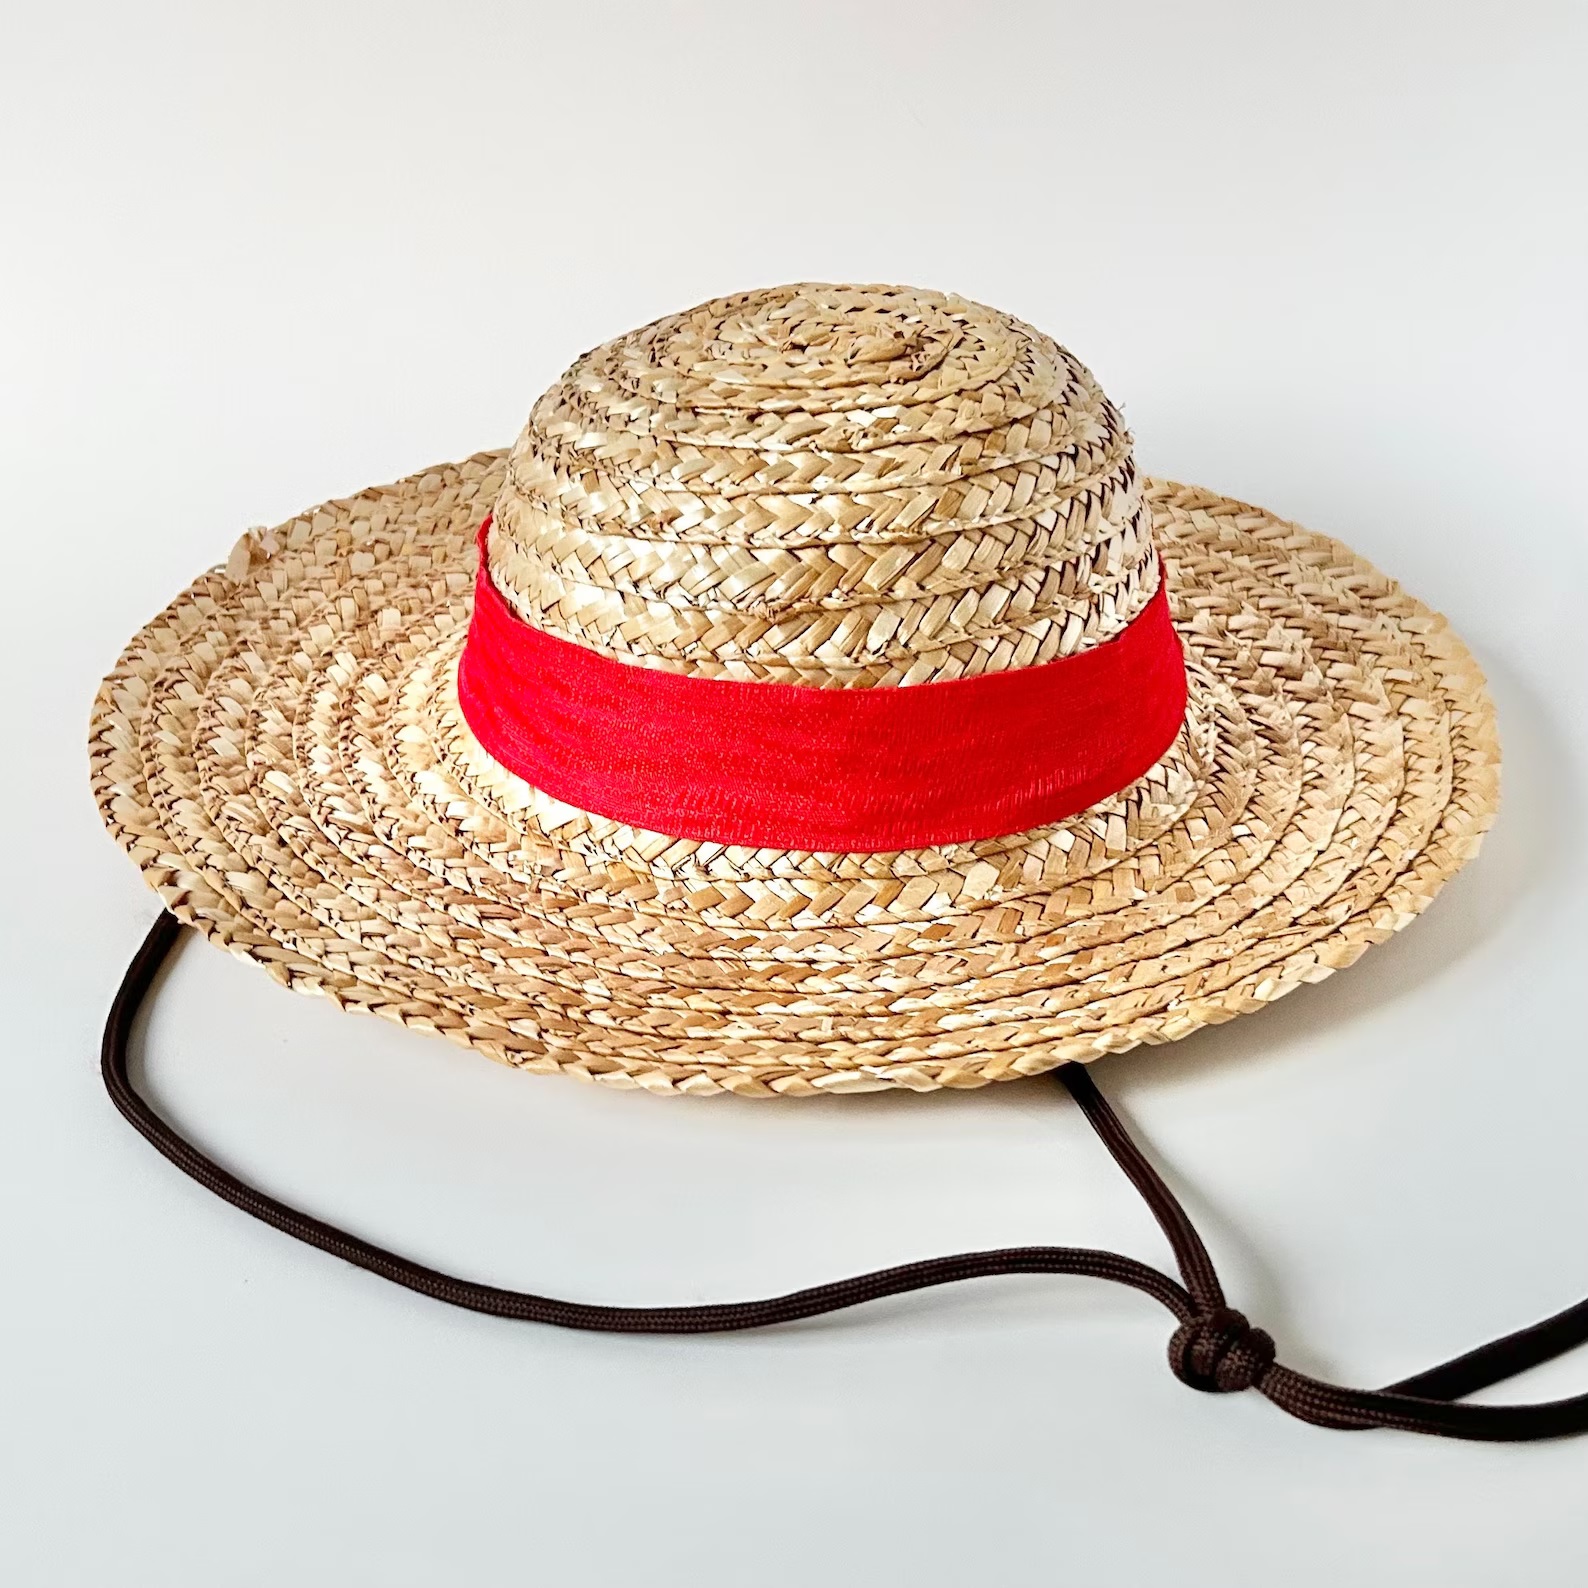 A straw hat patterned after the one Monkey D Luffy wears in One Piece